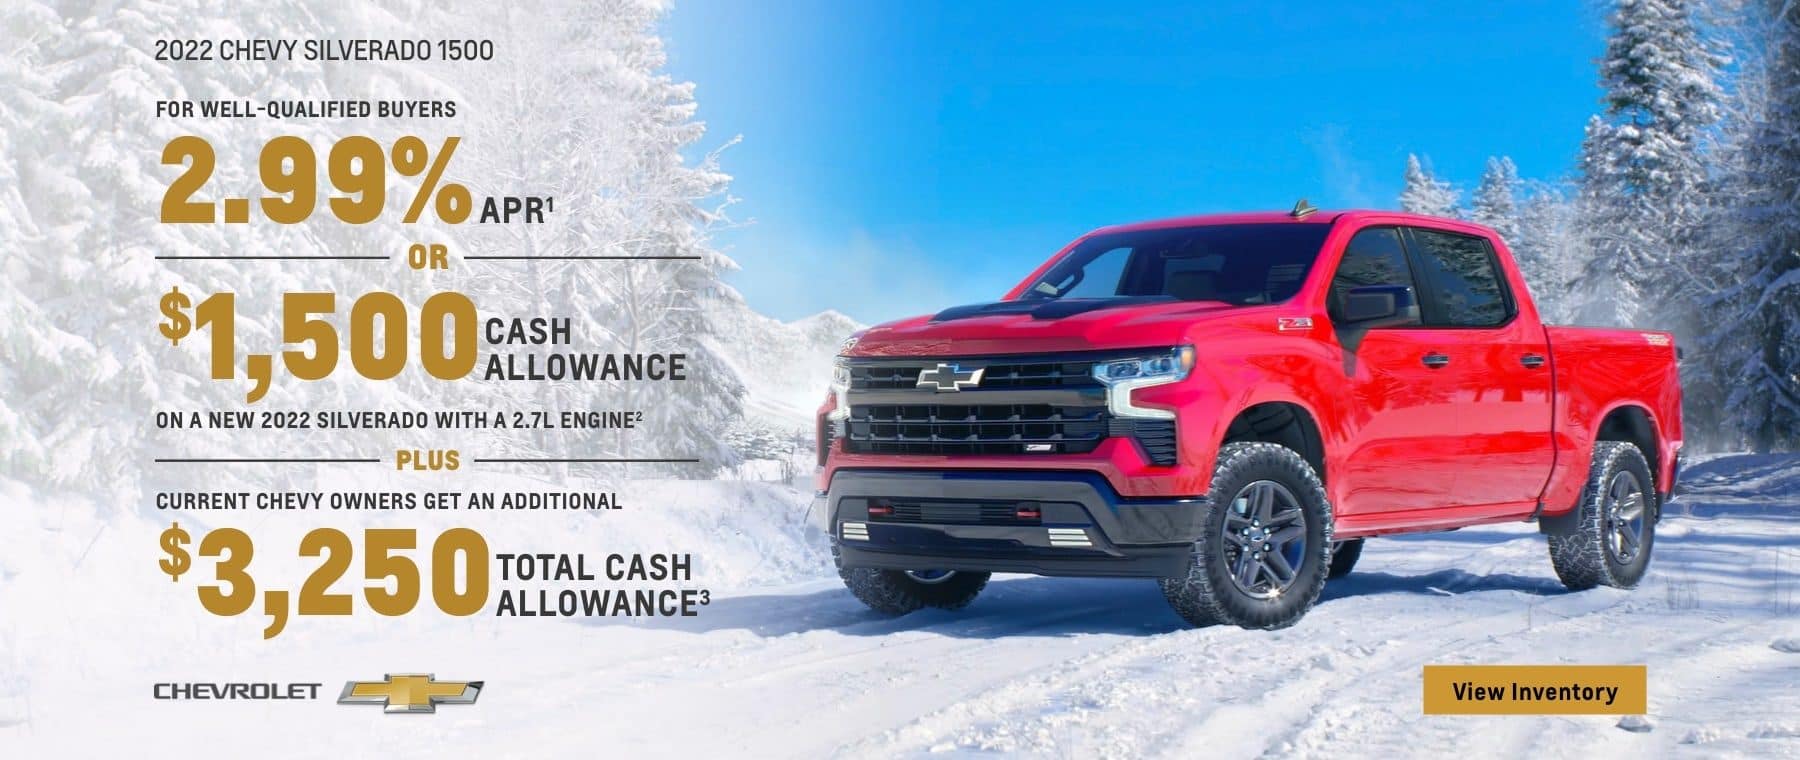 2022 Chevy Silverado 1500. For well-qualified buyers 2.99% APR. Or, $1,500 cash allowance on a new 2022 Silverado with a 2.7L engine. Plus, current Chevy owners get an additional $3,250 total cash allowance.